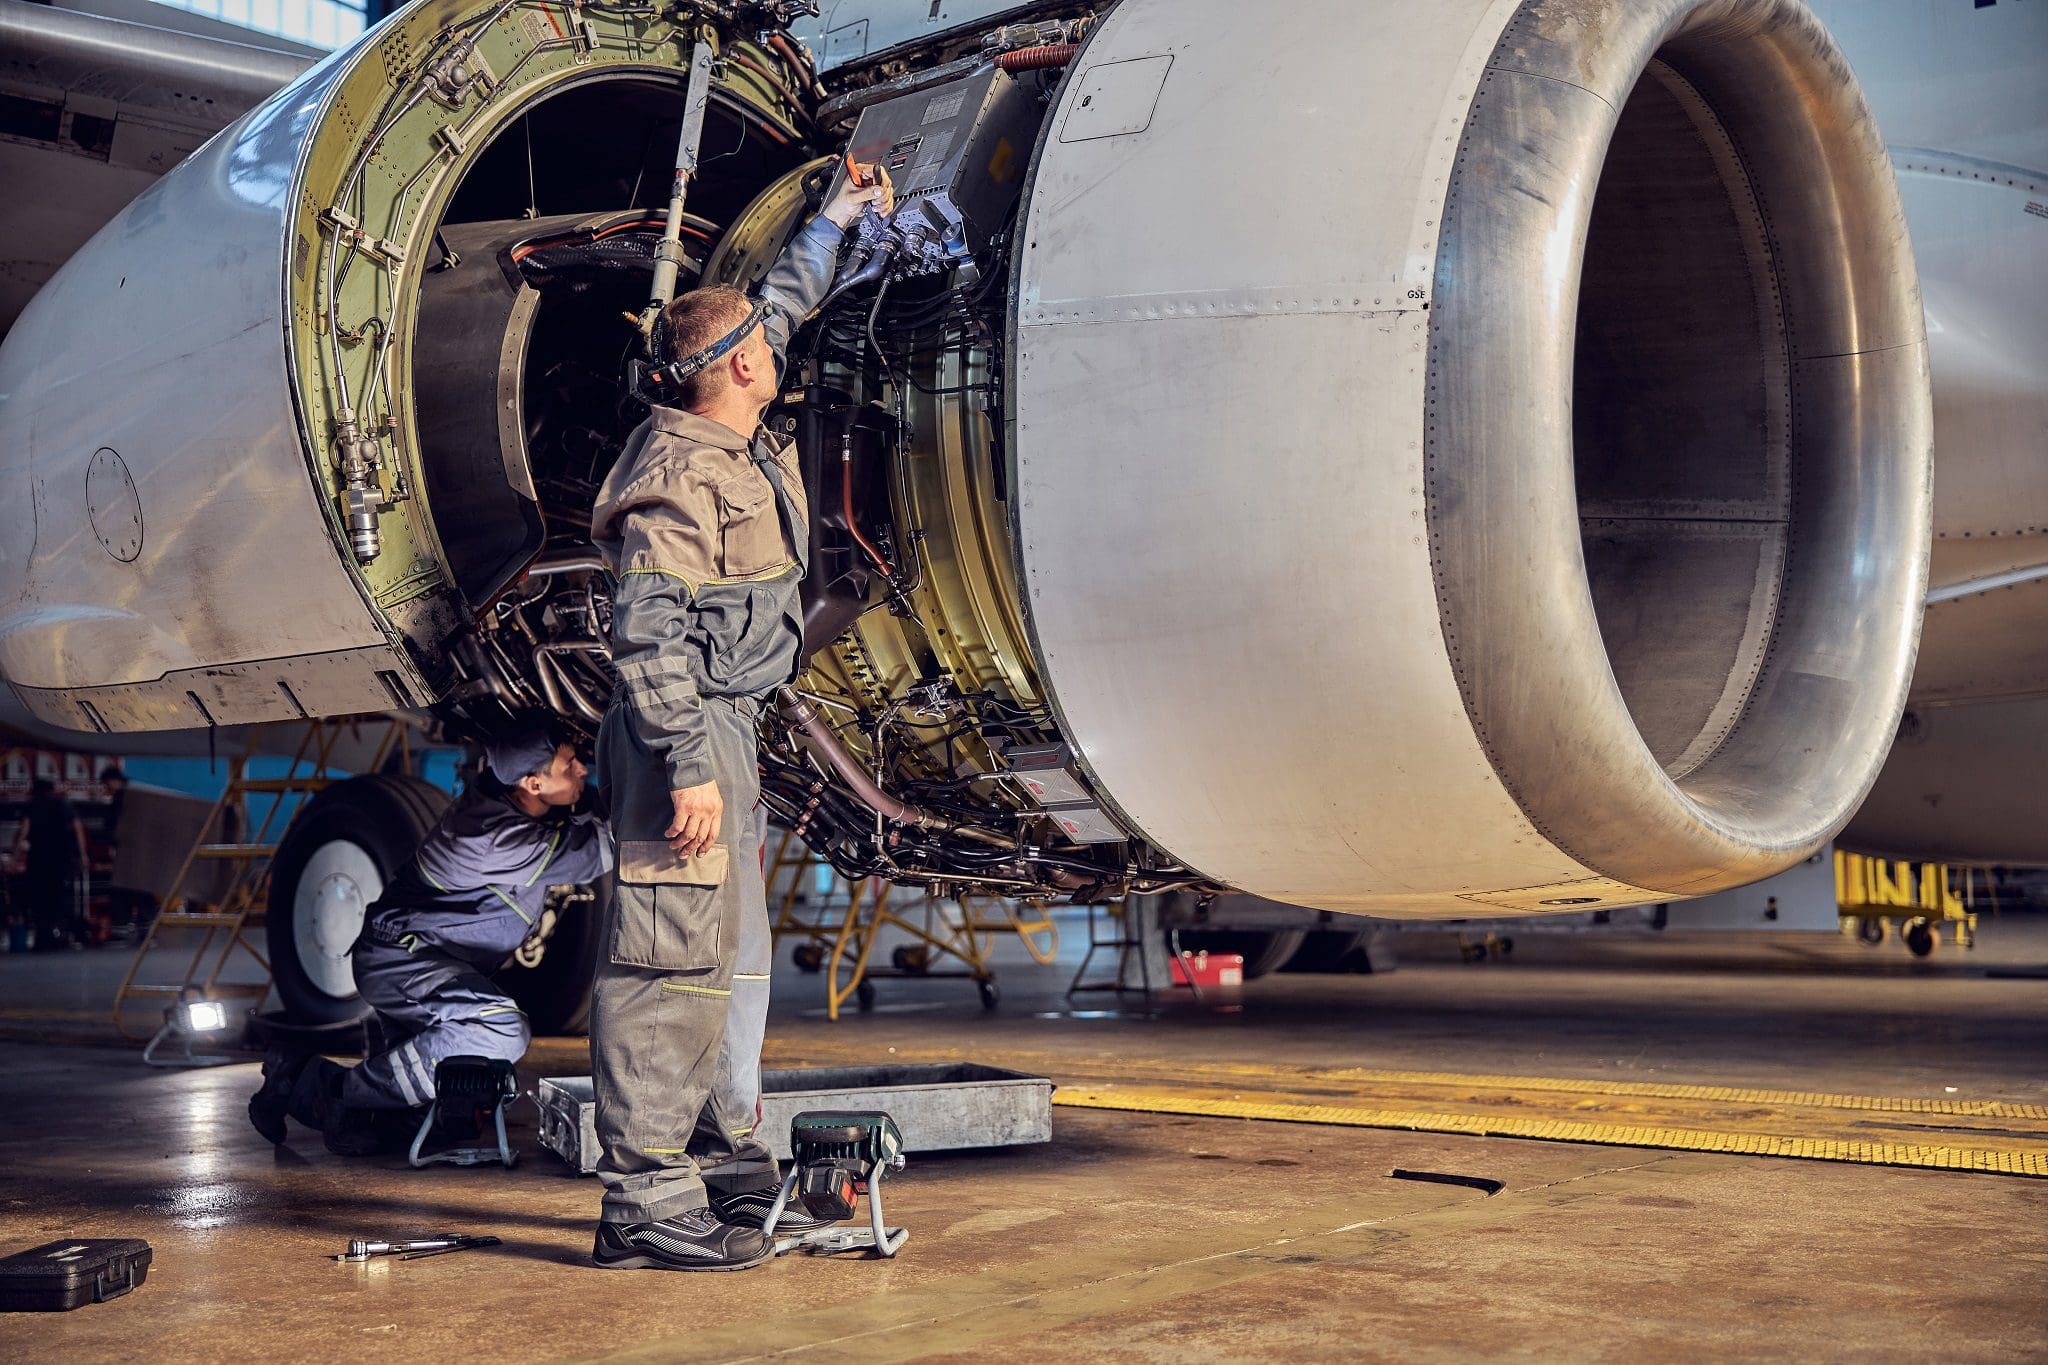 Full length portrait of 2 technicians who are repairing aircraft in the aviation hangar